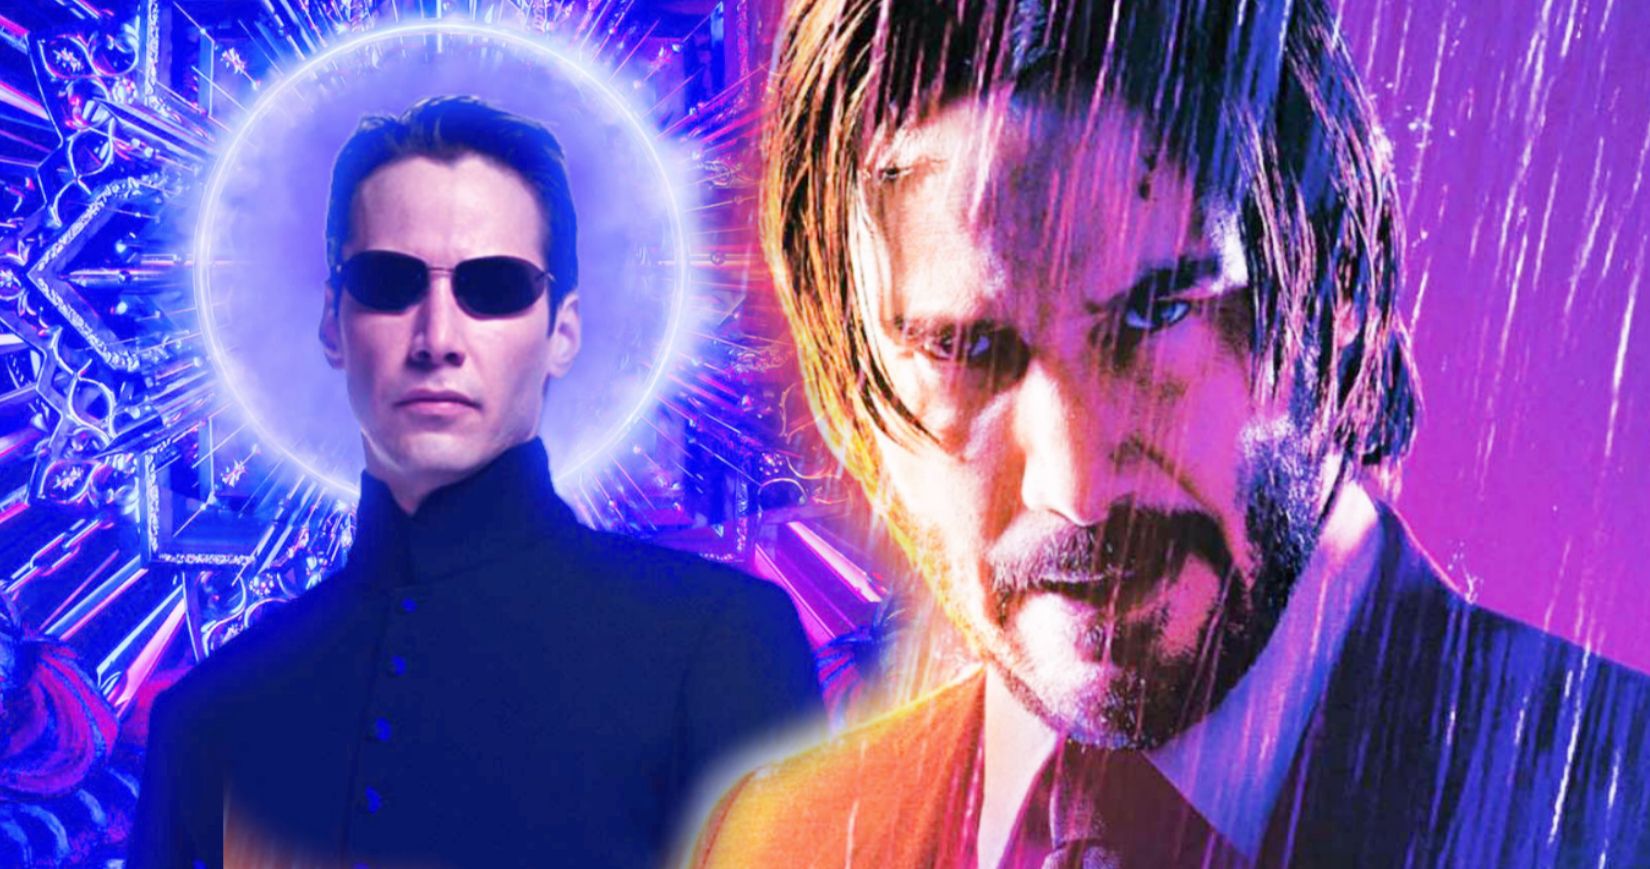 Neo Vs. John Wick: Keanu Reeves Has the Perfect Answer on Who'd Win